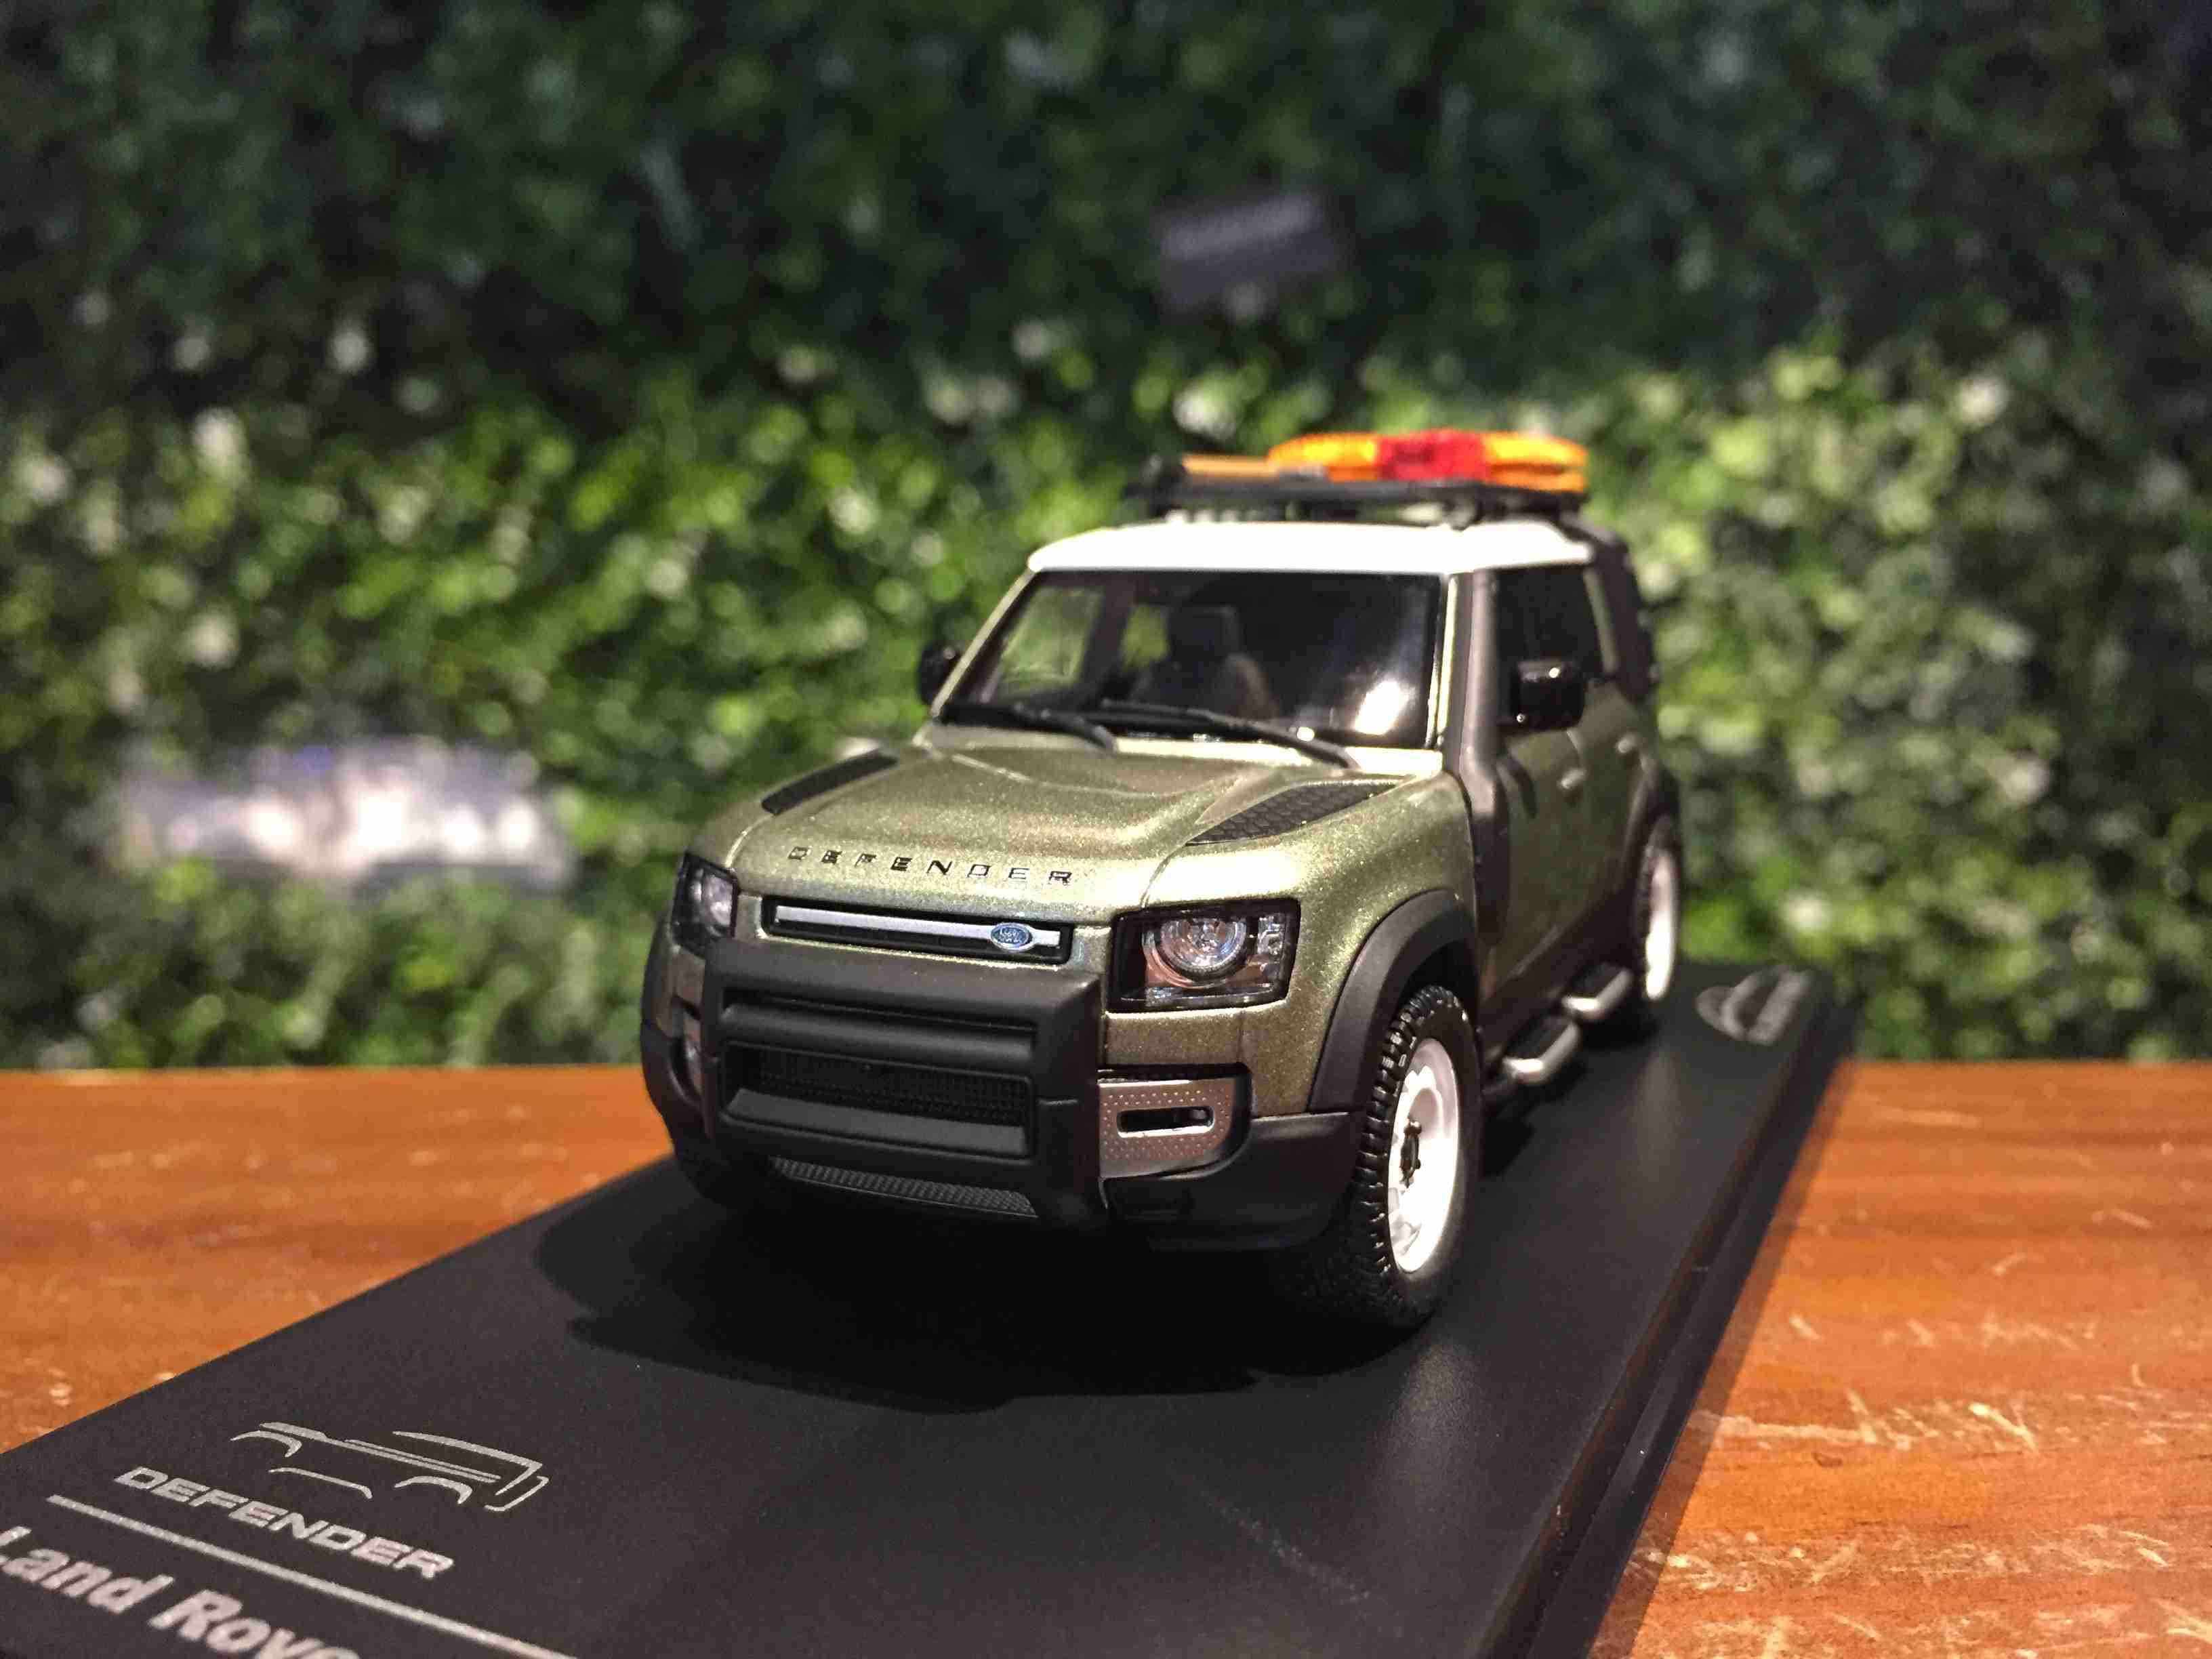 1/43 Almost Real Land Rover Defender 110 2020 410804【MGM】